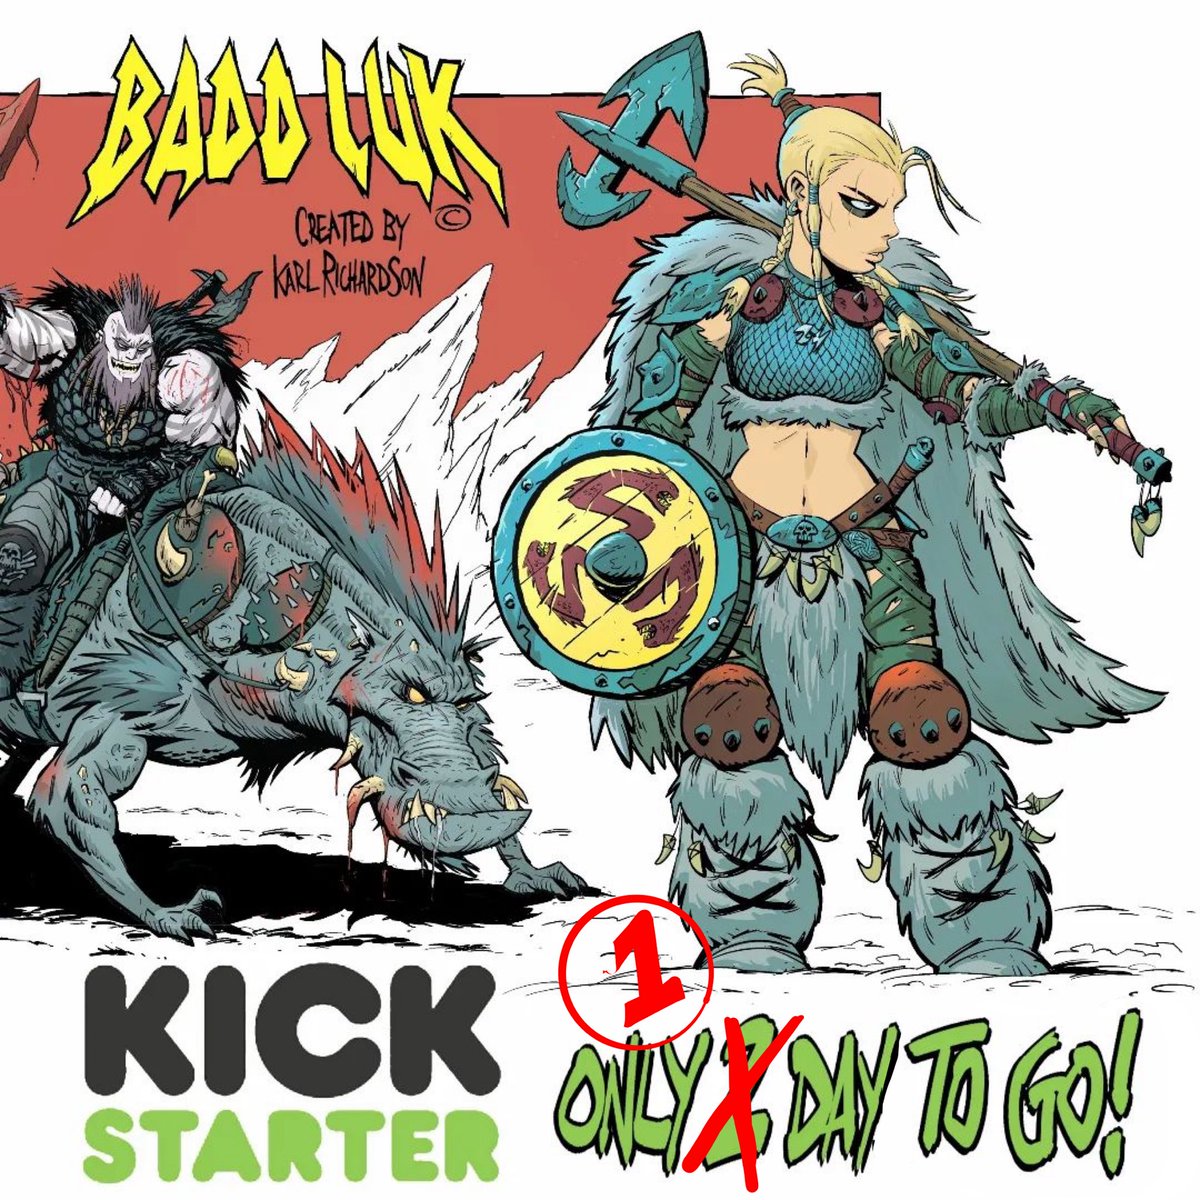 Only one day to go. Fully Funded. Last chance!
kickstarter.com/projects/karlr…